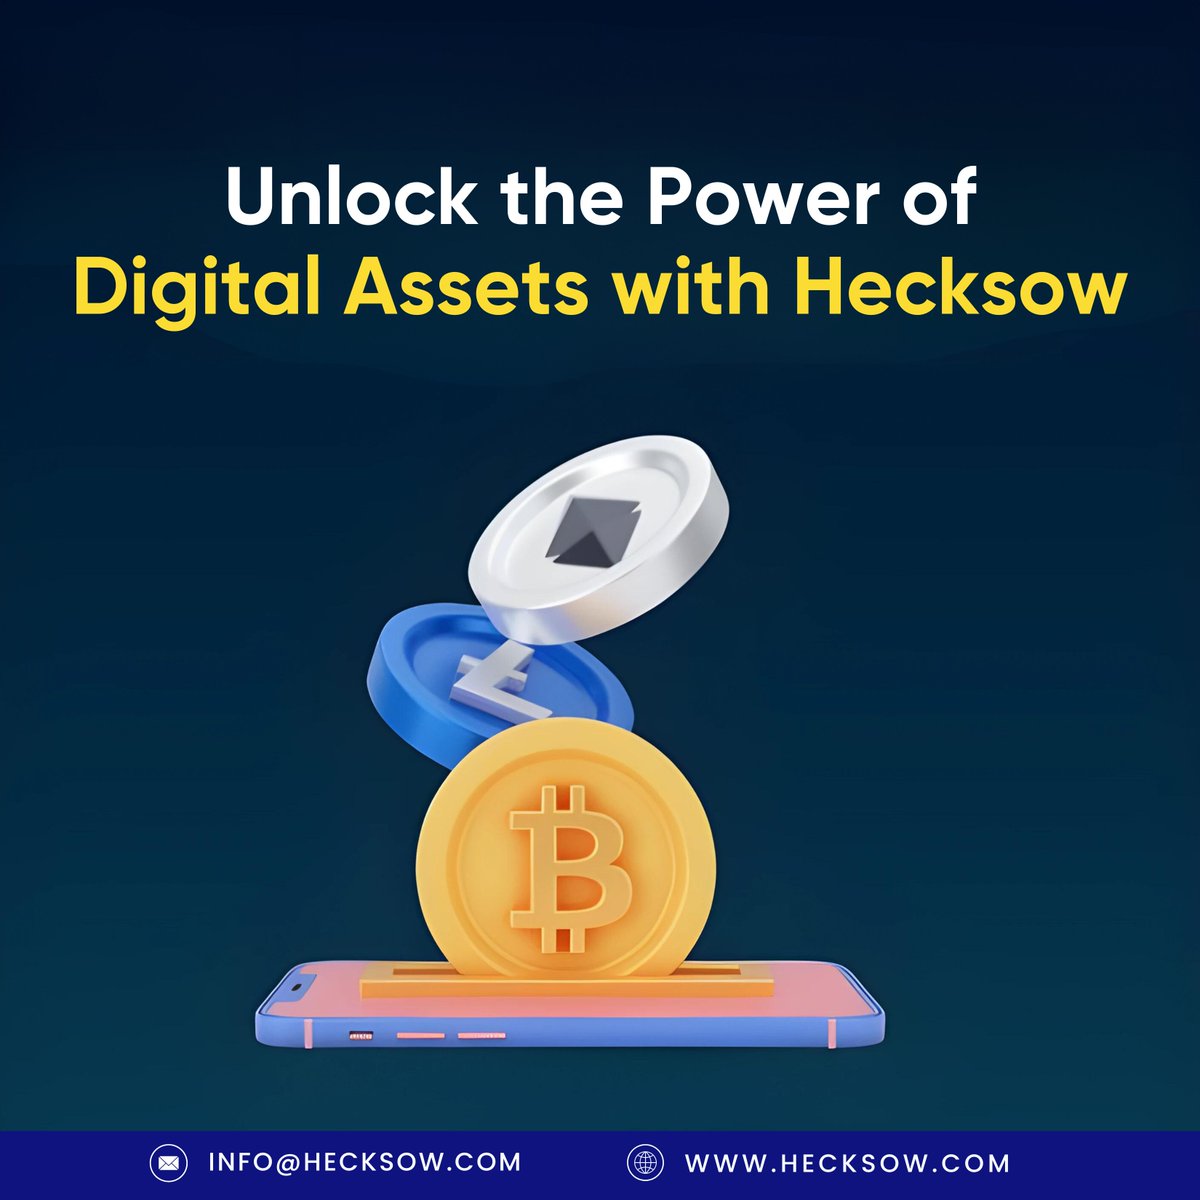 Unlock the power of digital assets with Hecksow! 🚀 Step into the future of real estate—where your digital wealth opens new doors. 🏡 Explore innovative investment solutions at hecksow.com. #HecksowHomes #DigitalAssets #BlockchainRealEstate #FutureOfInvesting